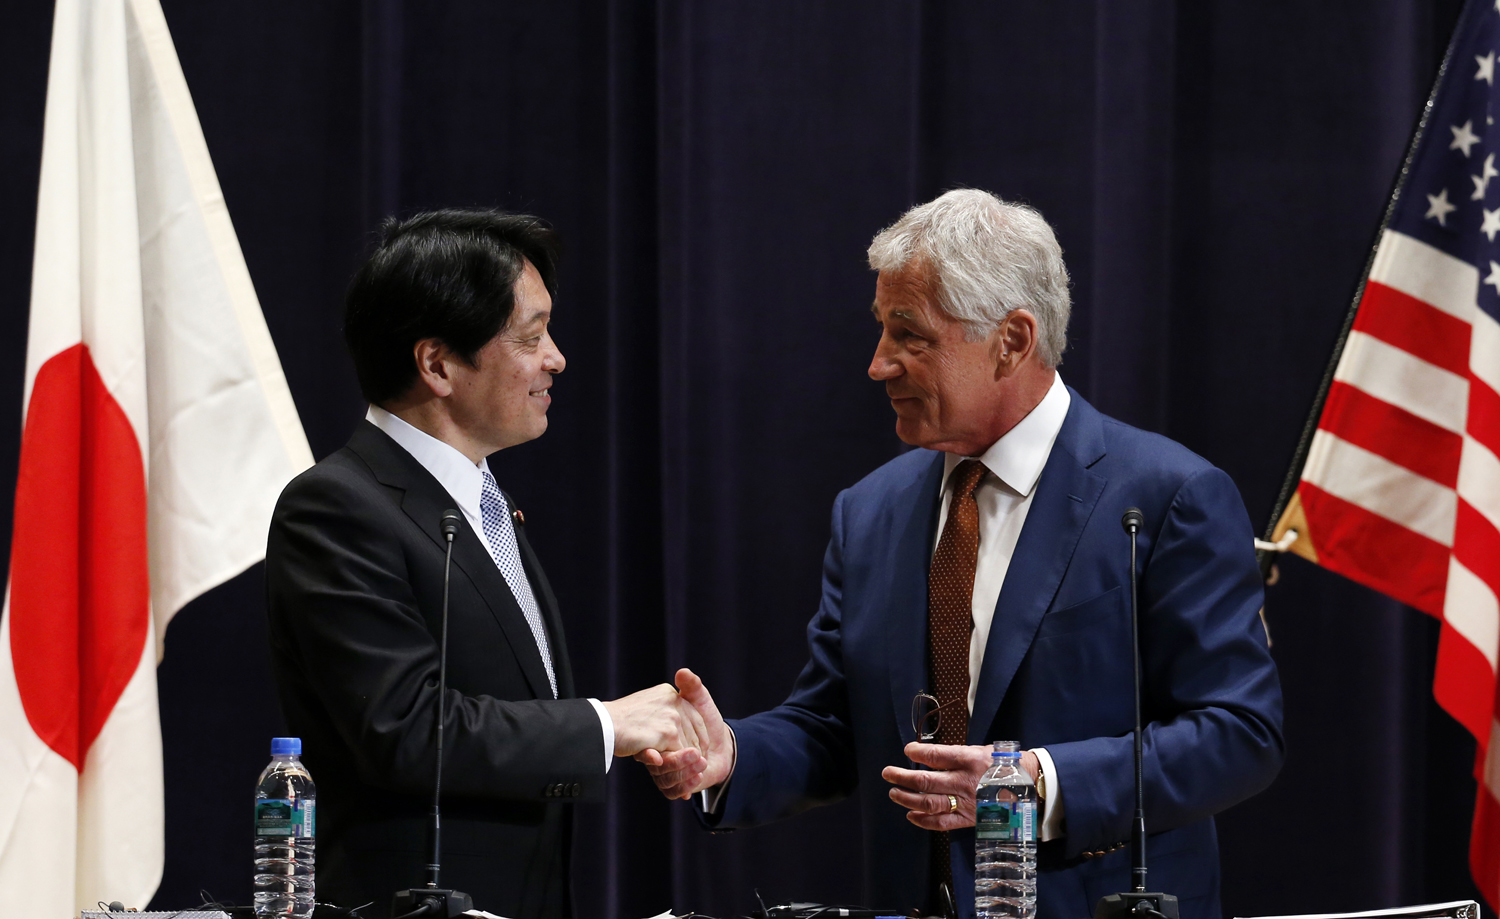 From right: U.S. Secretary of Defense Chuck Hagel shakes hands with his Japanese counterpart Itsunori Onodera at the end of their joint news conference at the Defense Ministry in Tokyo on April 6, 2014.